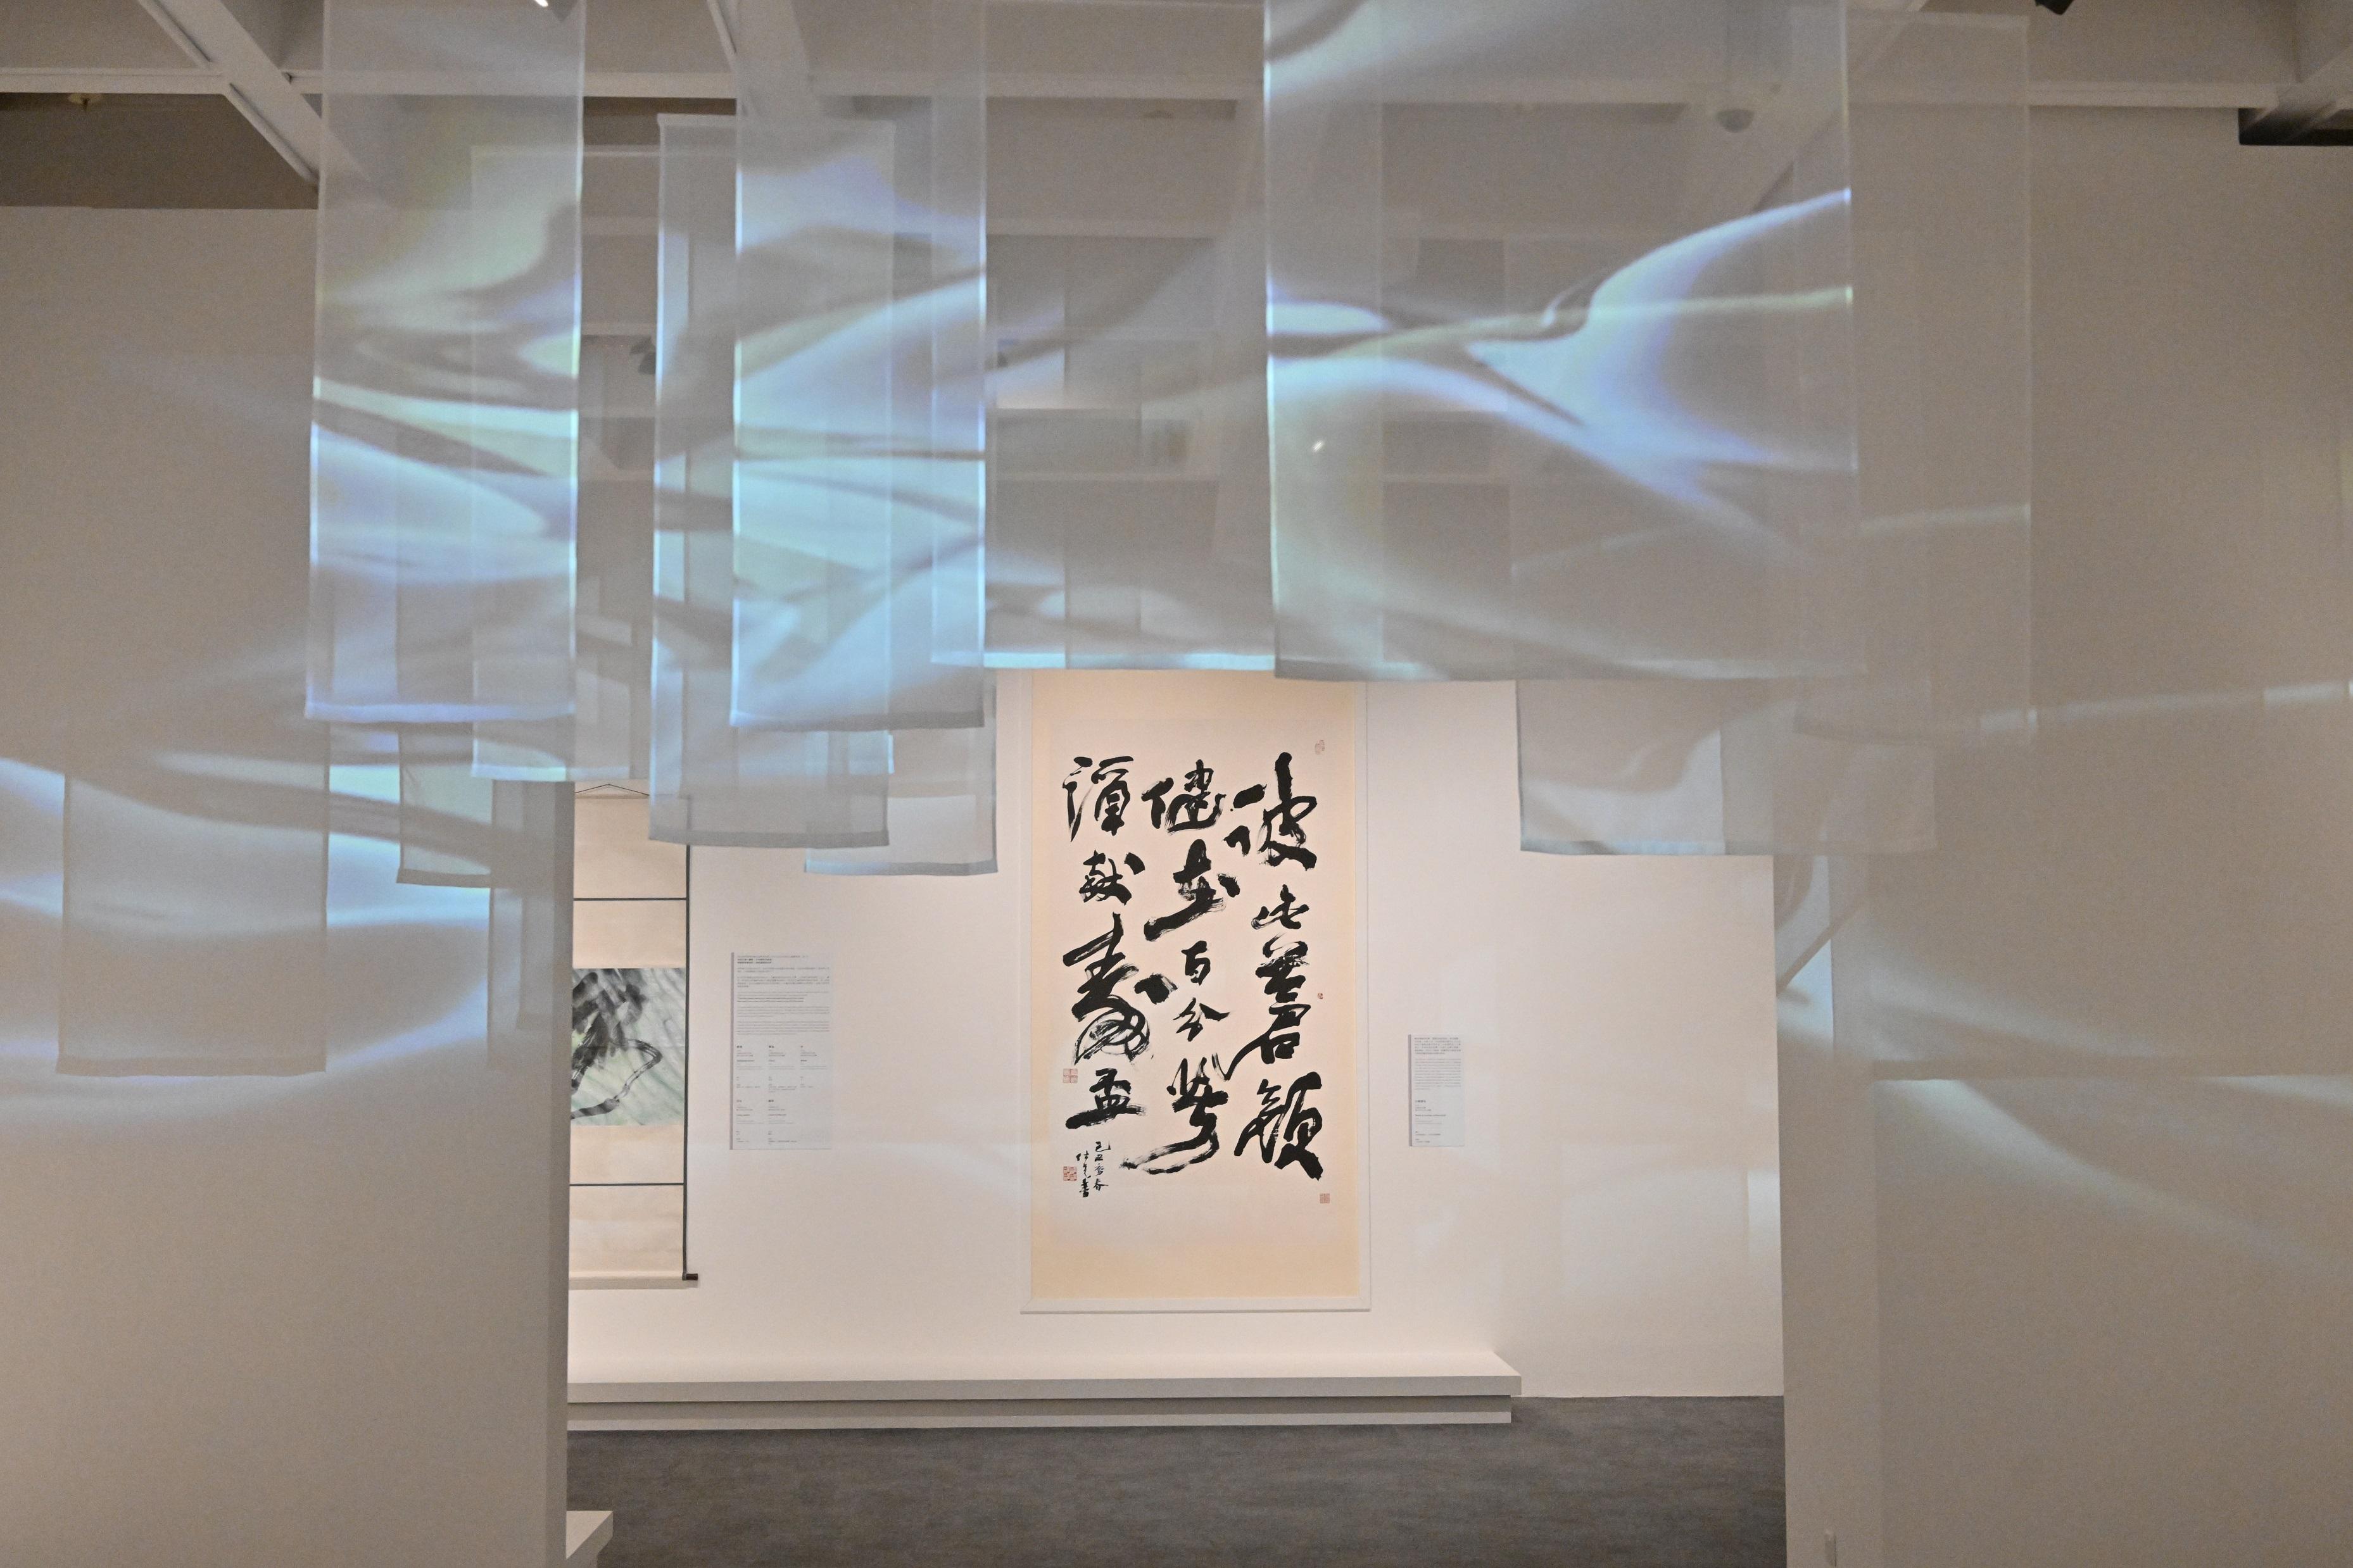 The opening ceremony of the "Boundless Universe: Calligraphy by Jat See-yeu" exhibition and donation ceremony was held today (December 7) at the Hong Kong Museum of Art. Photo shows a large work, "Verse in running-cursive script", from his later years.